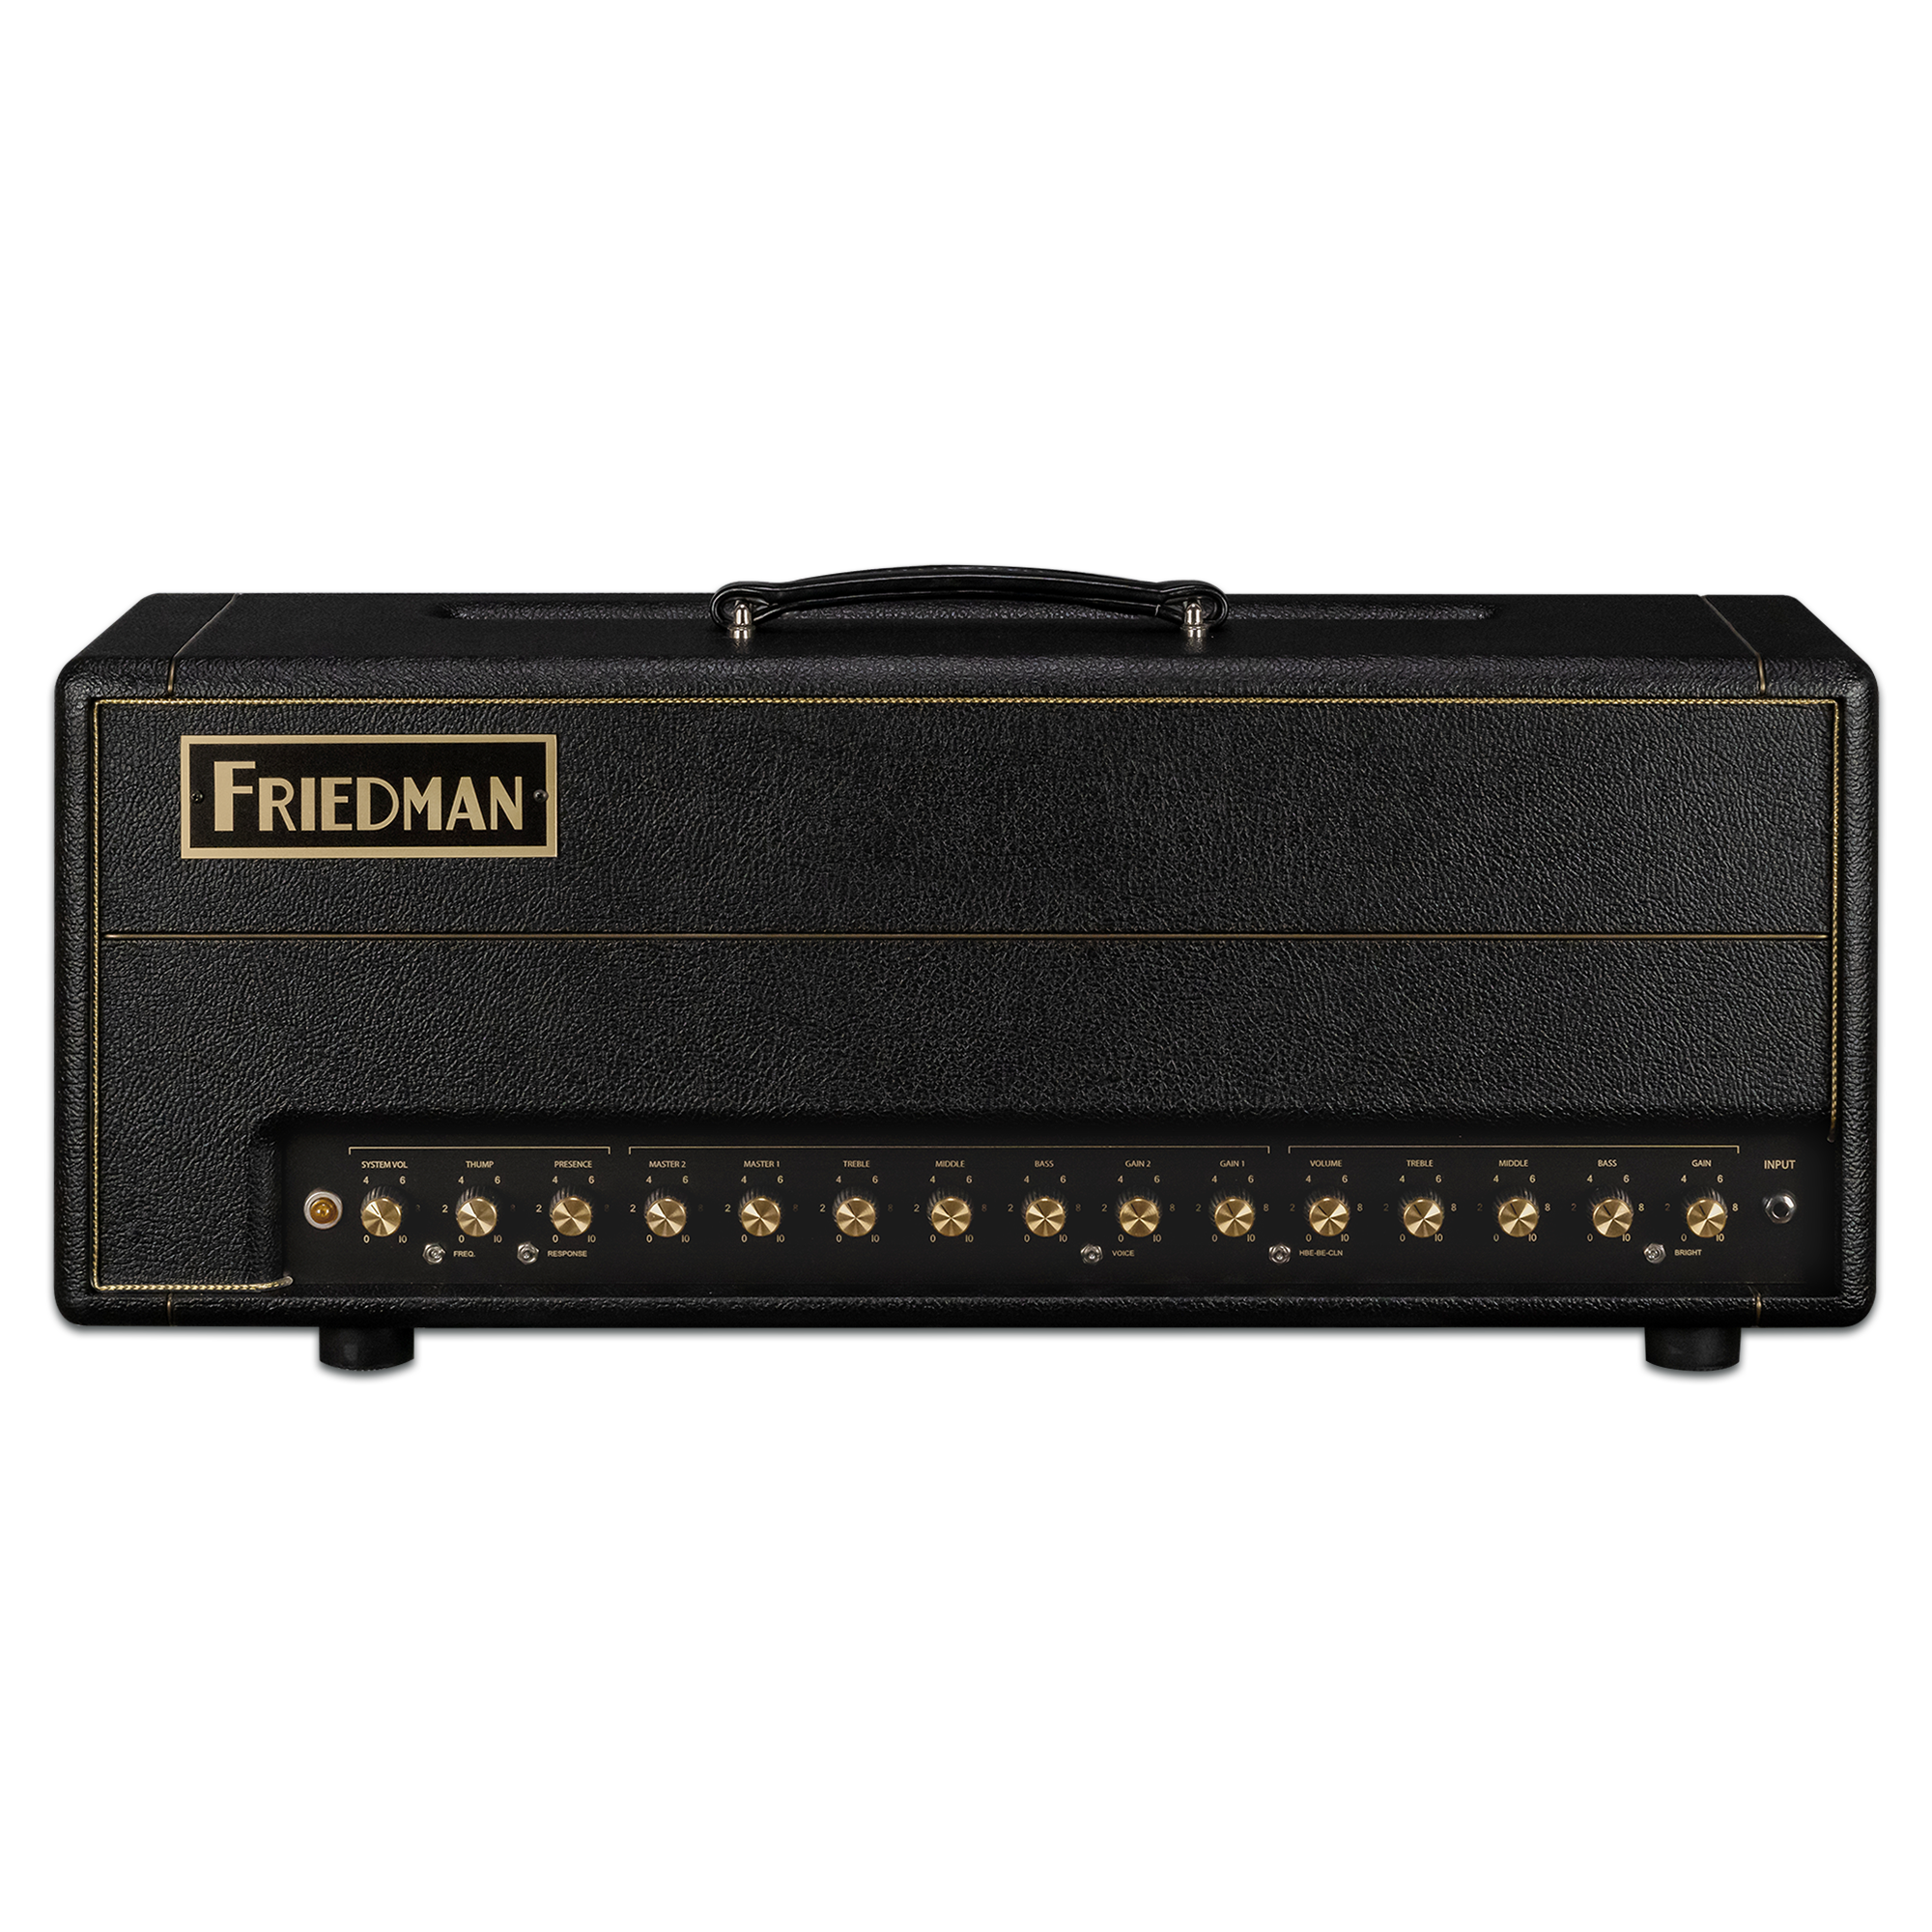 Friedman Amplification Be-100 Deluxe Head 100w - Electric guitar amp head - Variation 1